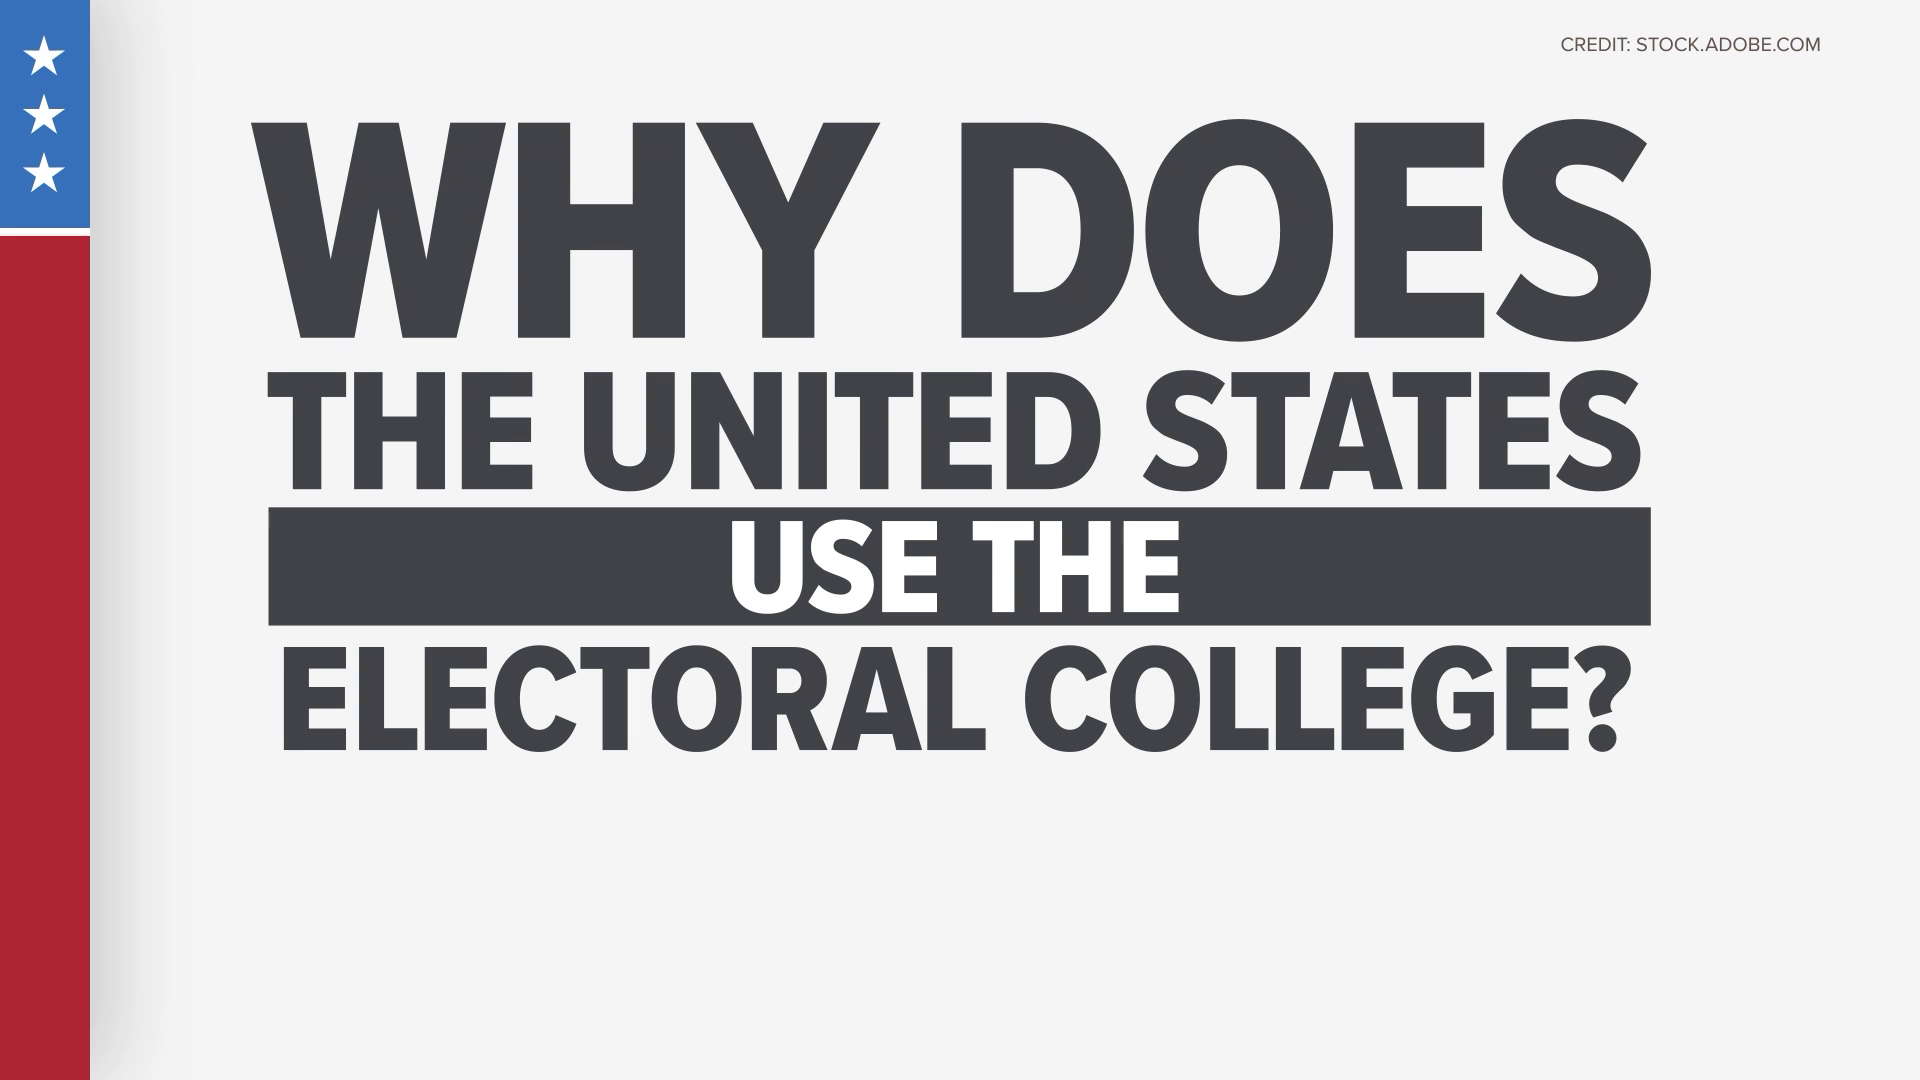 Here is how the U.S. got the electoral college to pick a president and how it works.